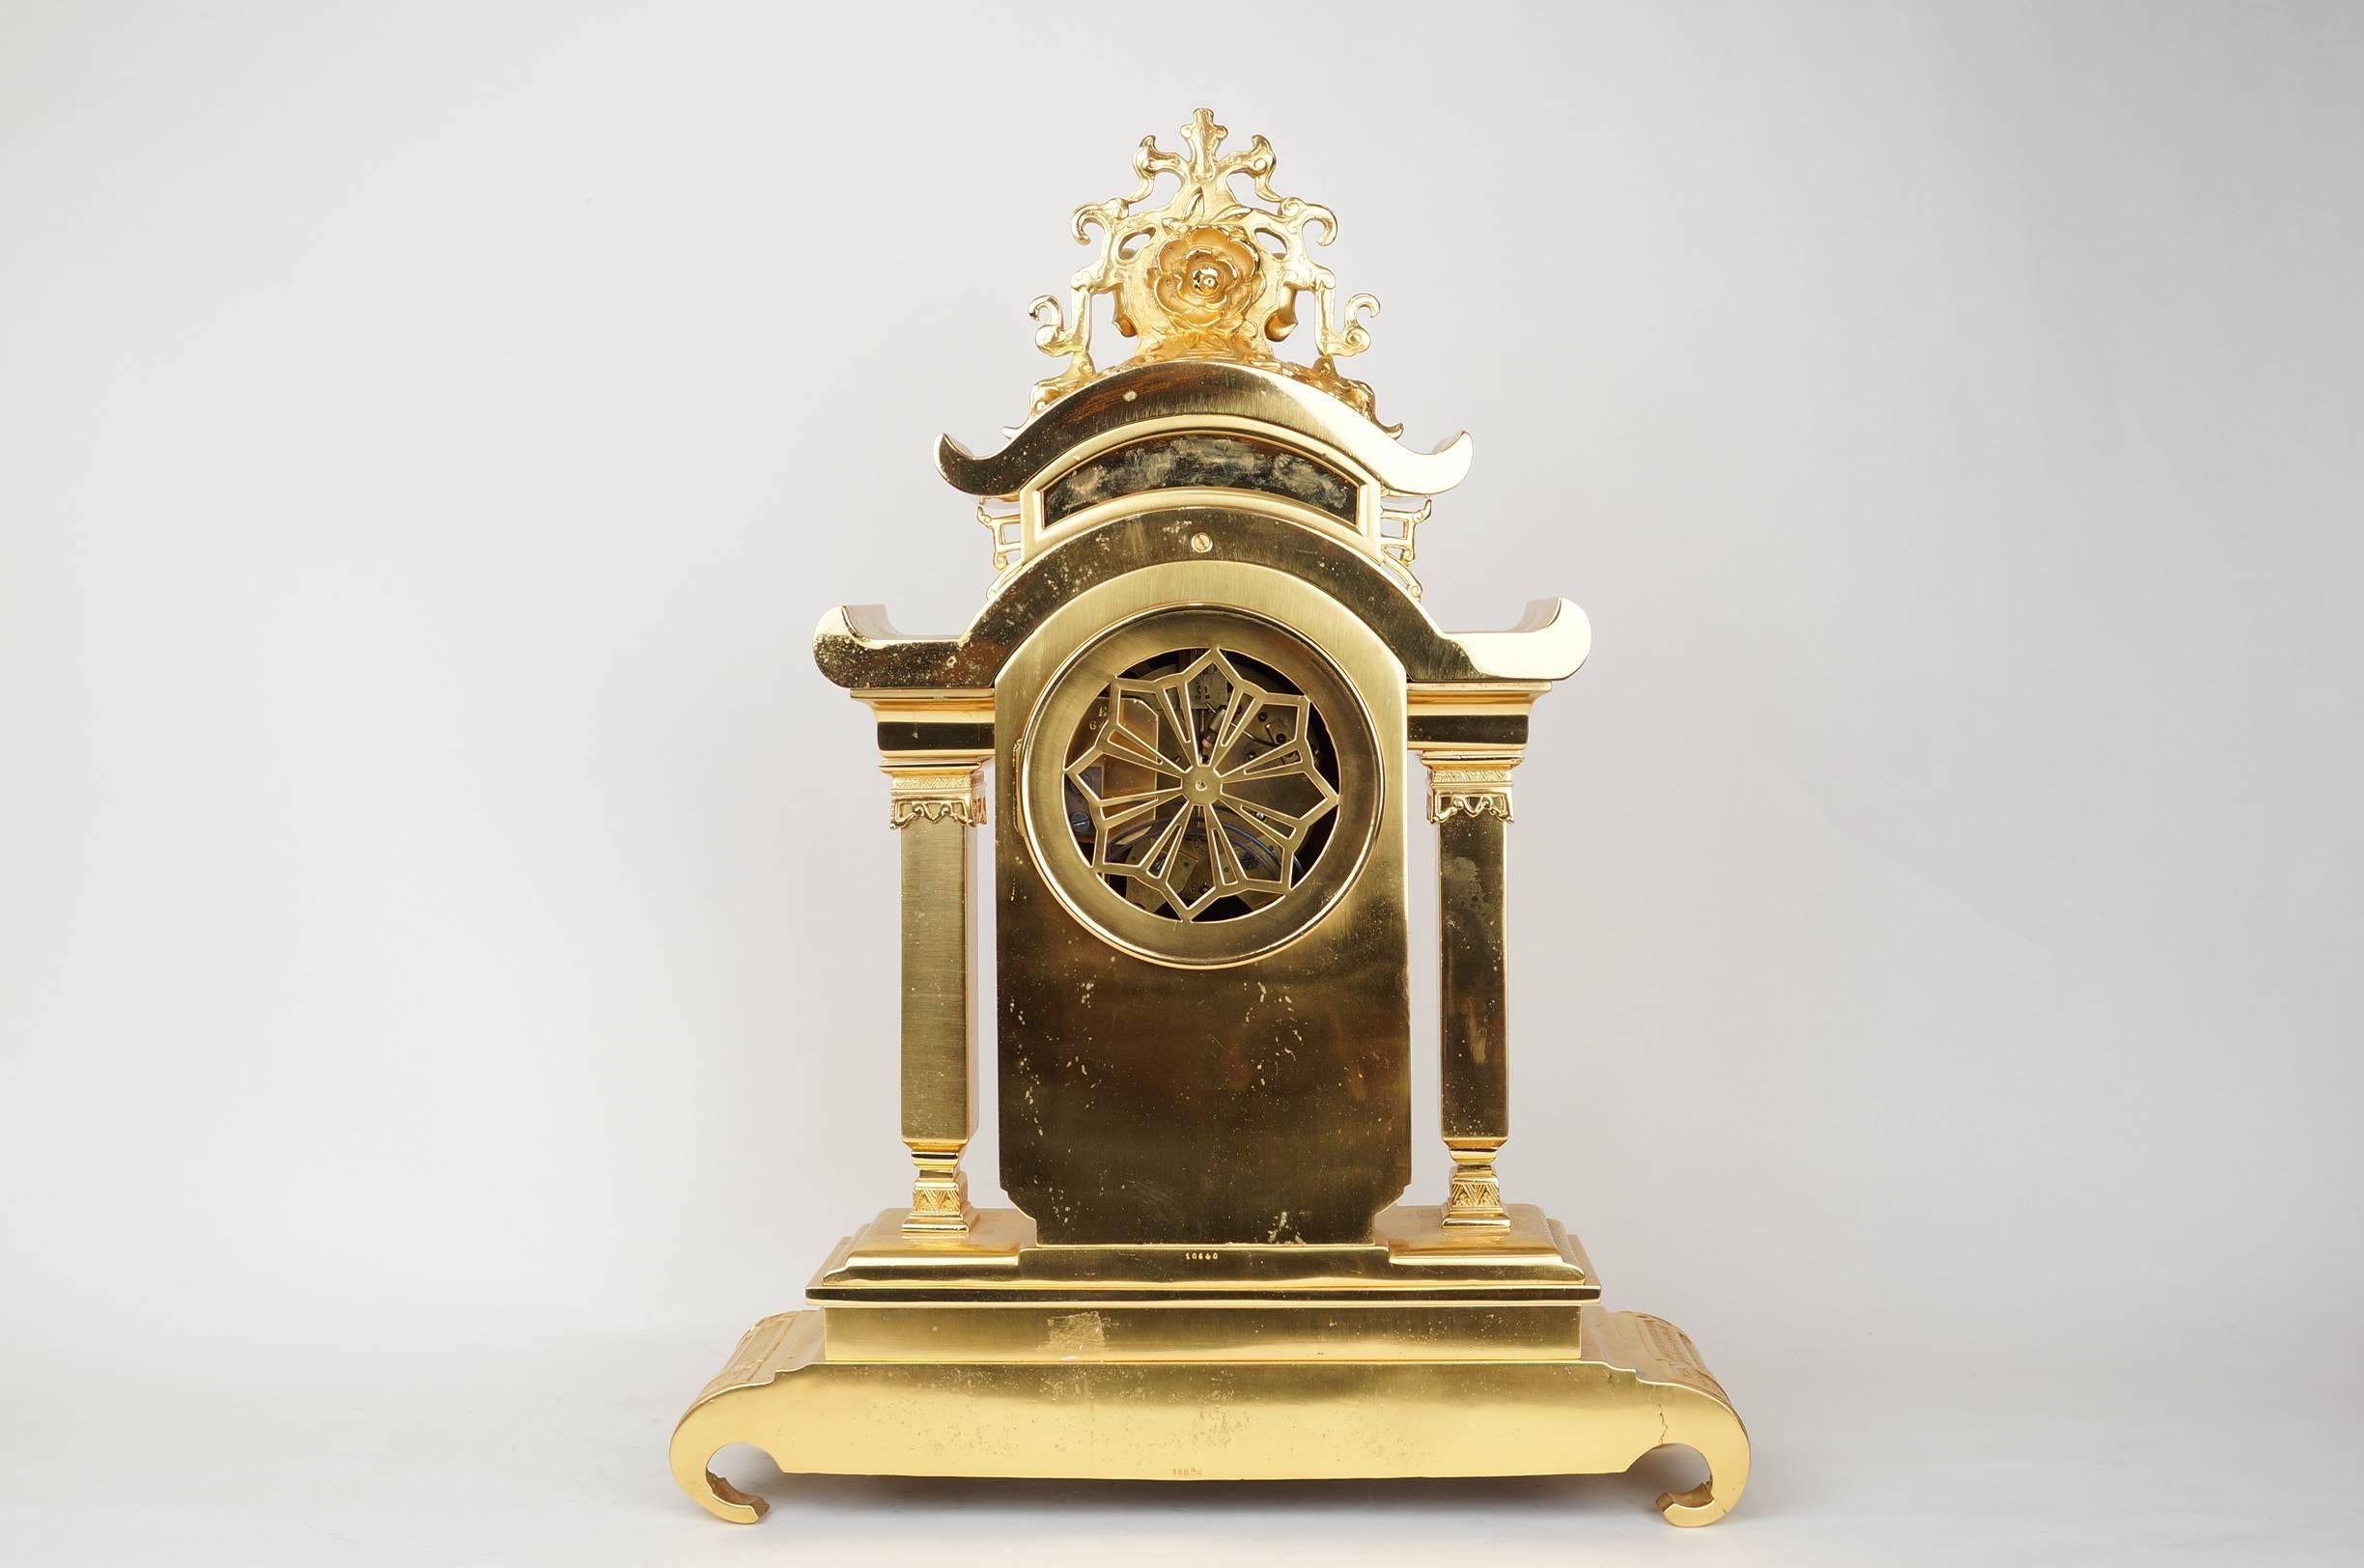 Important Oriental Japonism style French gilt bronze two toned mantel clock set made for the oriental market with gilt bronze dragon handles and elephant figure on top with forest scene motif with birds and trees.
The two side pieces can be used as